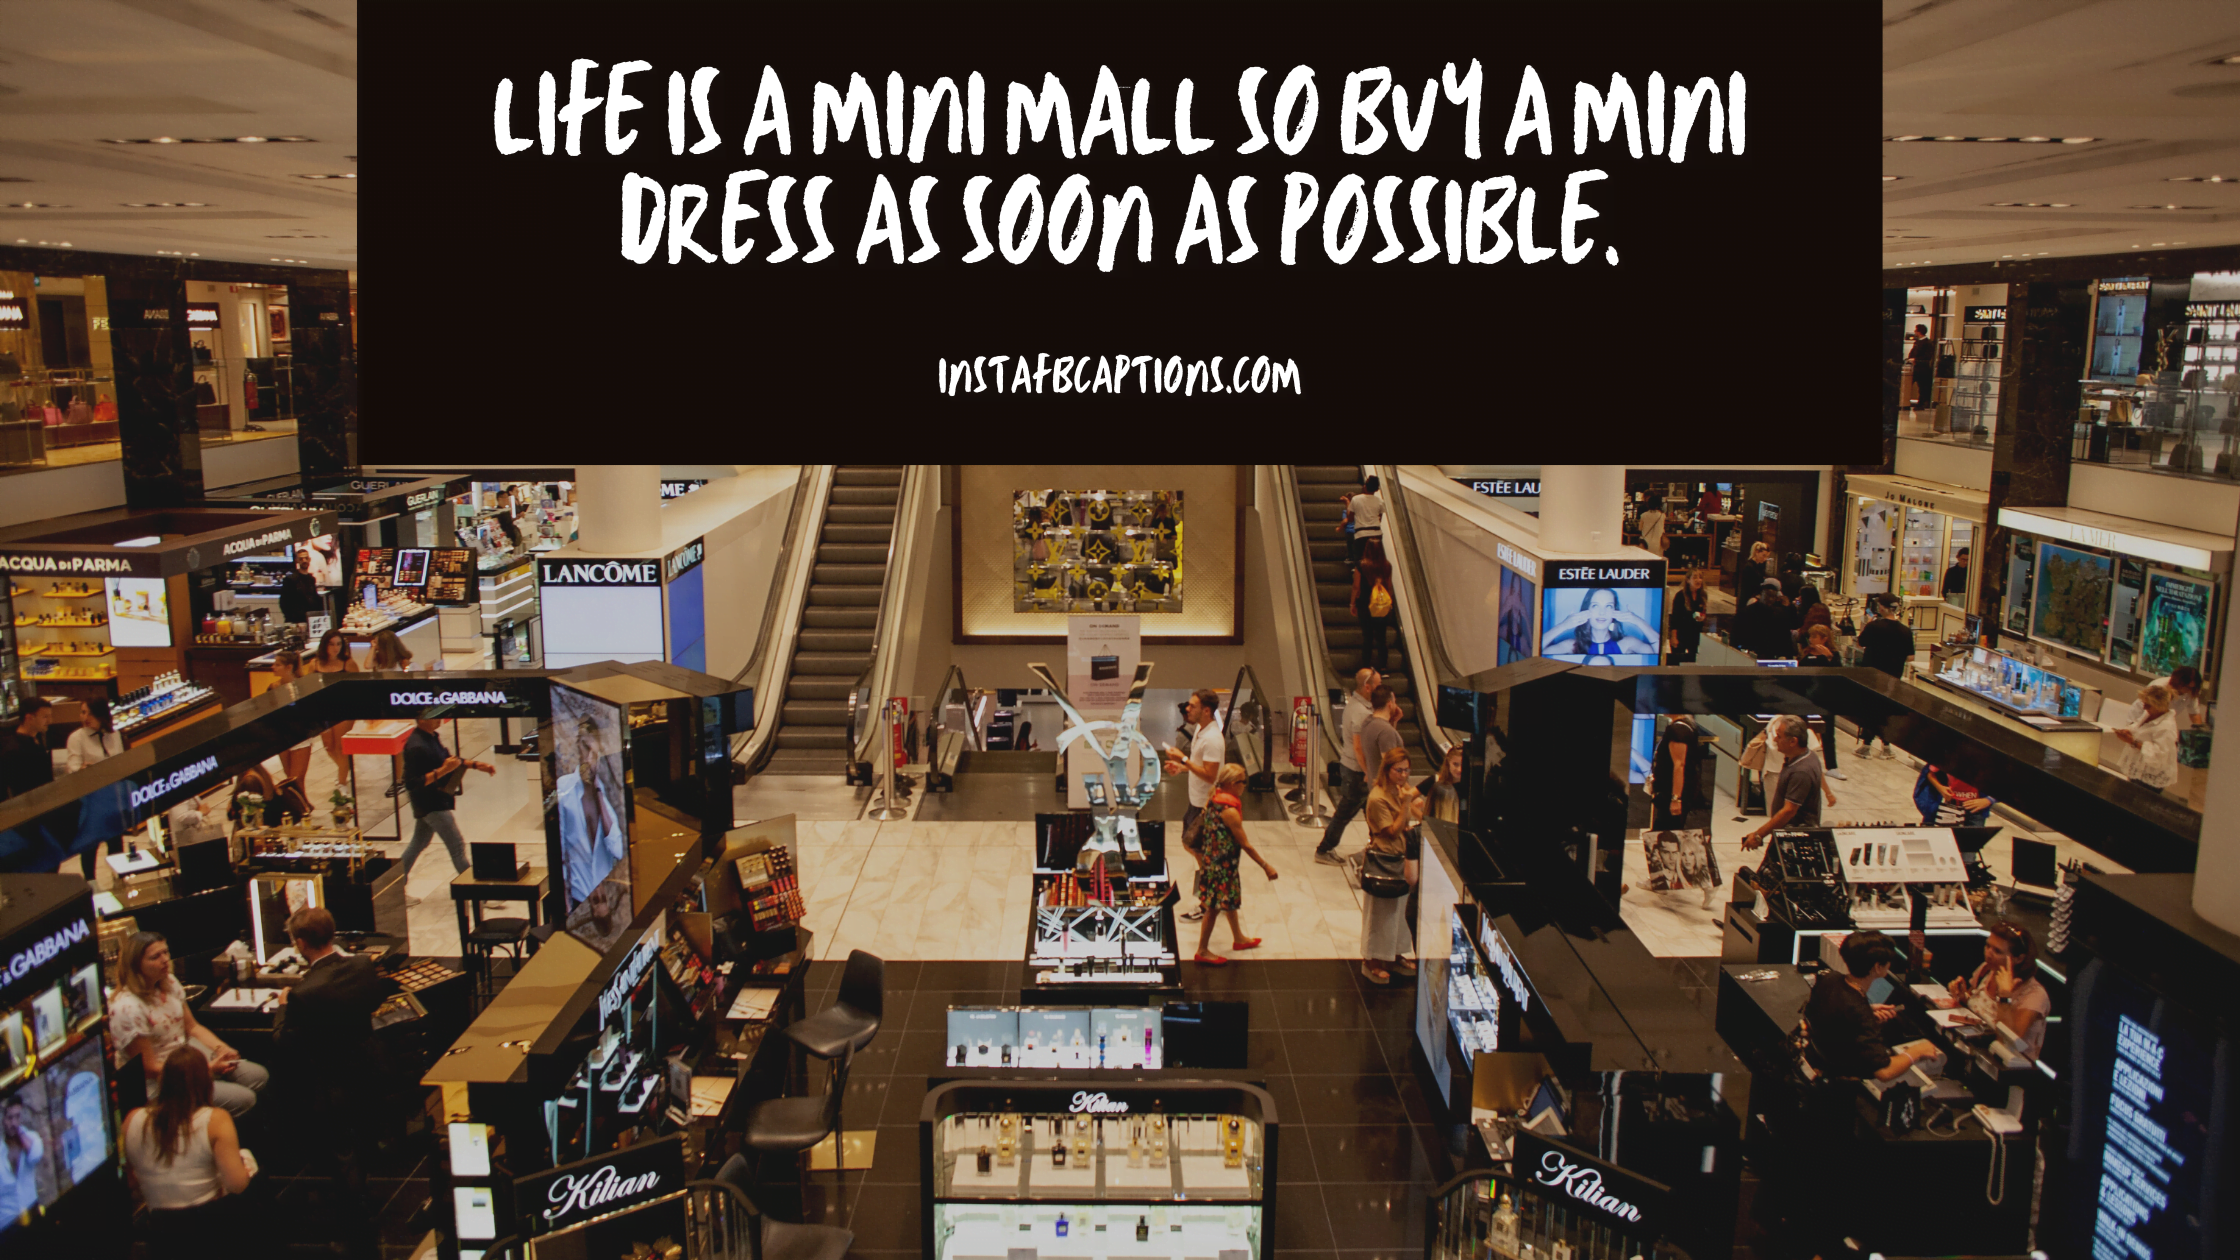 A Unknown Mall at the background and a caption written - Life is a Mini Mall so buy a mini dress as soon as possible.  - Shopping Mall Instagram captions - 89 SHOPPING Captions for Instagram Pics in 2023